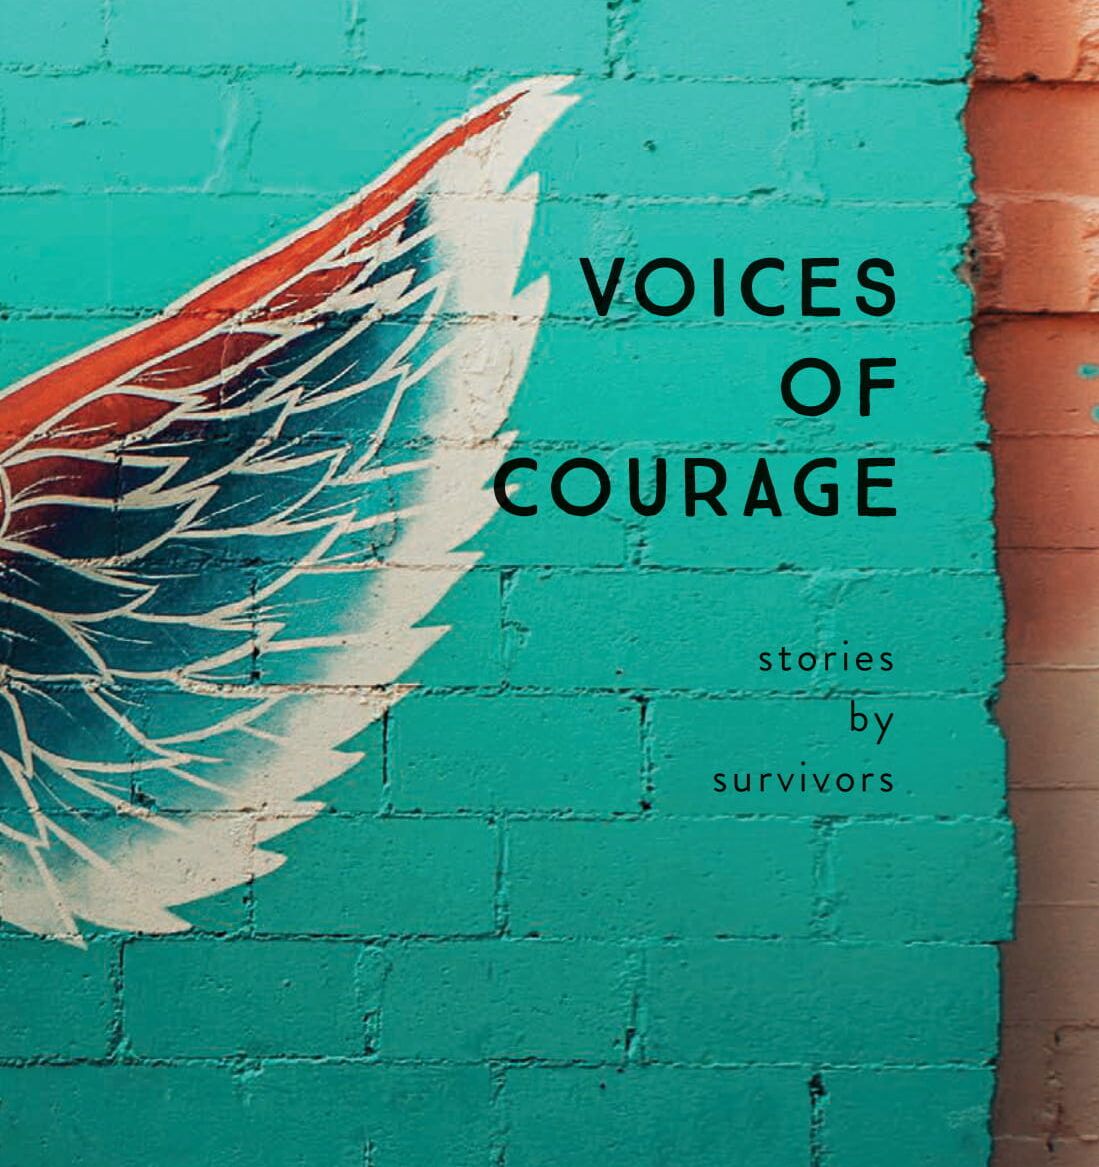 a wing and title voices of courage